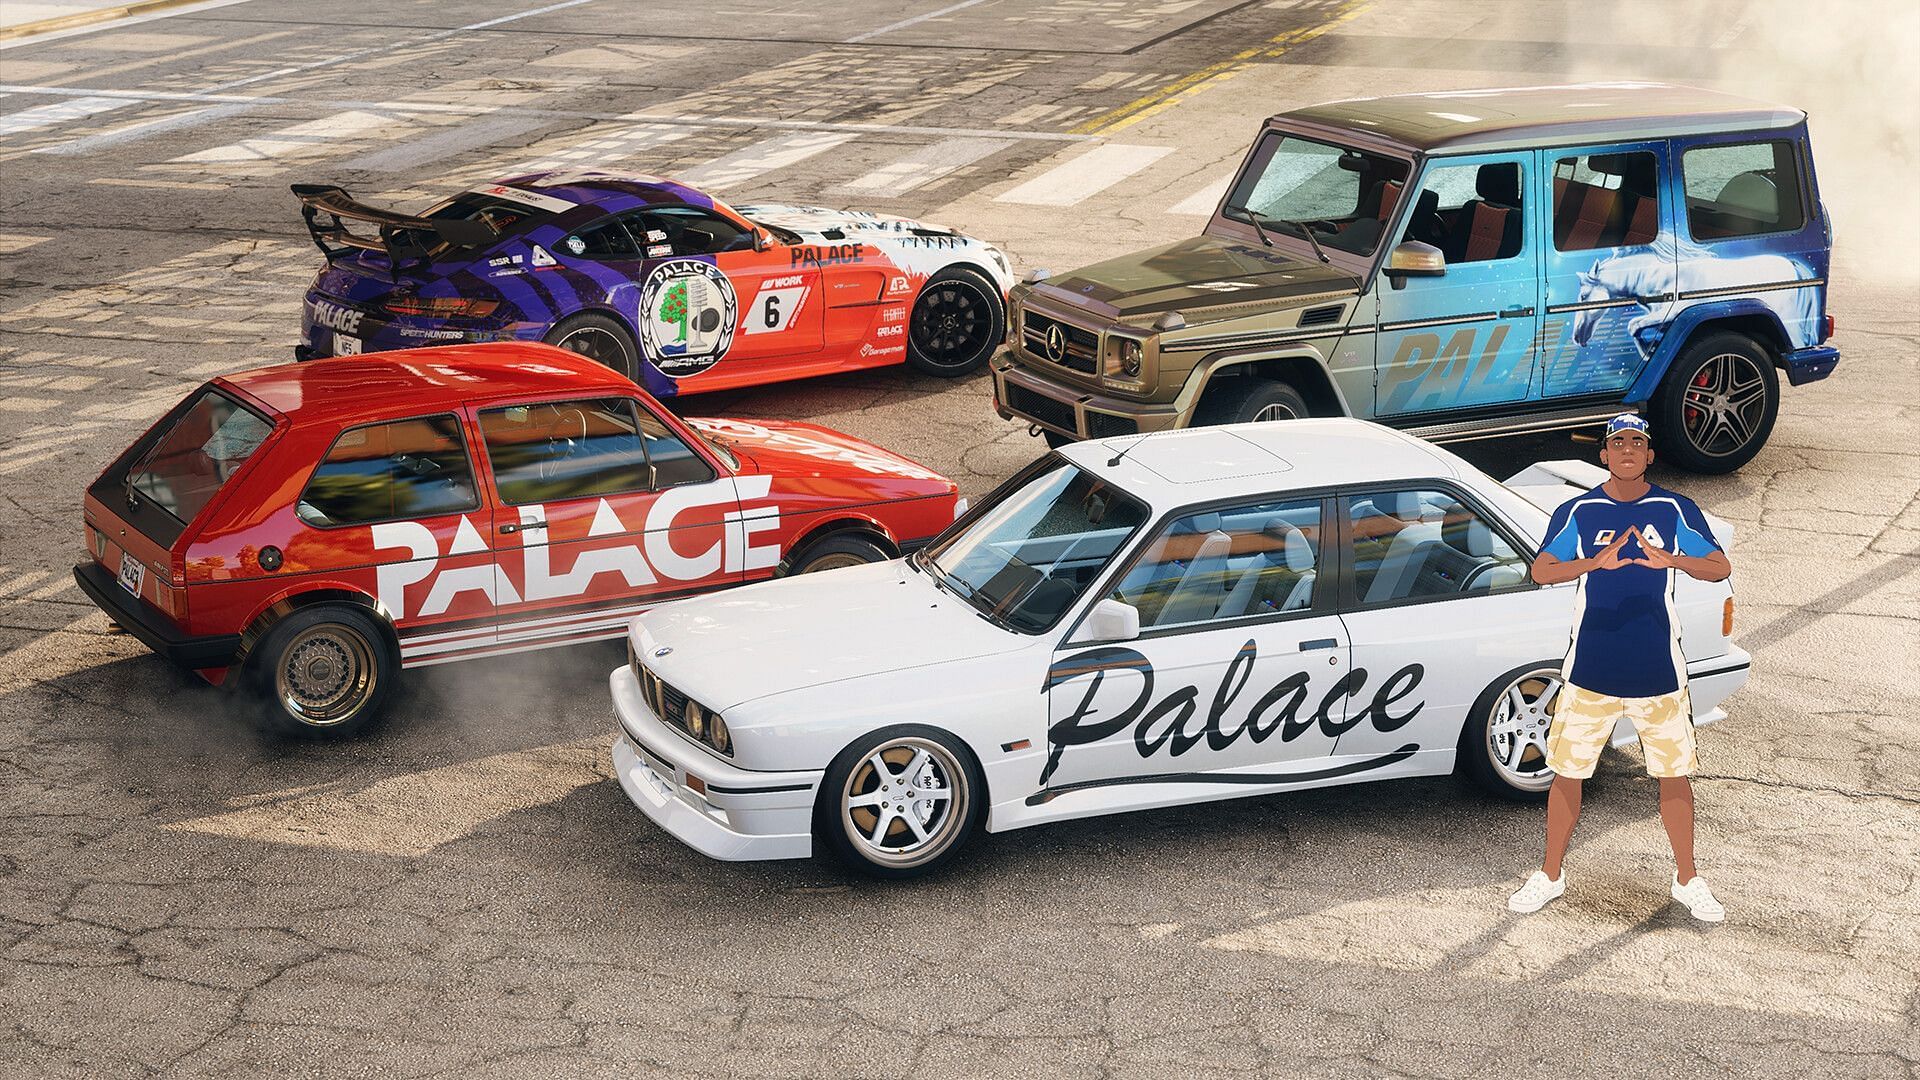 The Palace Edition comes with a host of in-game goodies as well as four &quot;Palace&quot; edition high-performance cars (Image via Criterion Games)